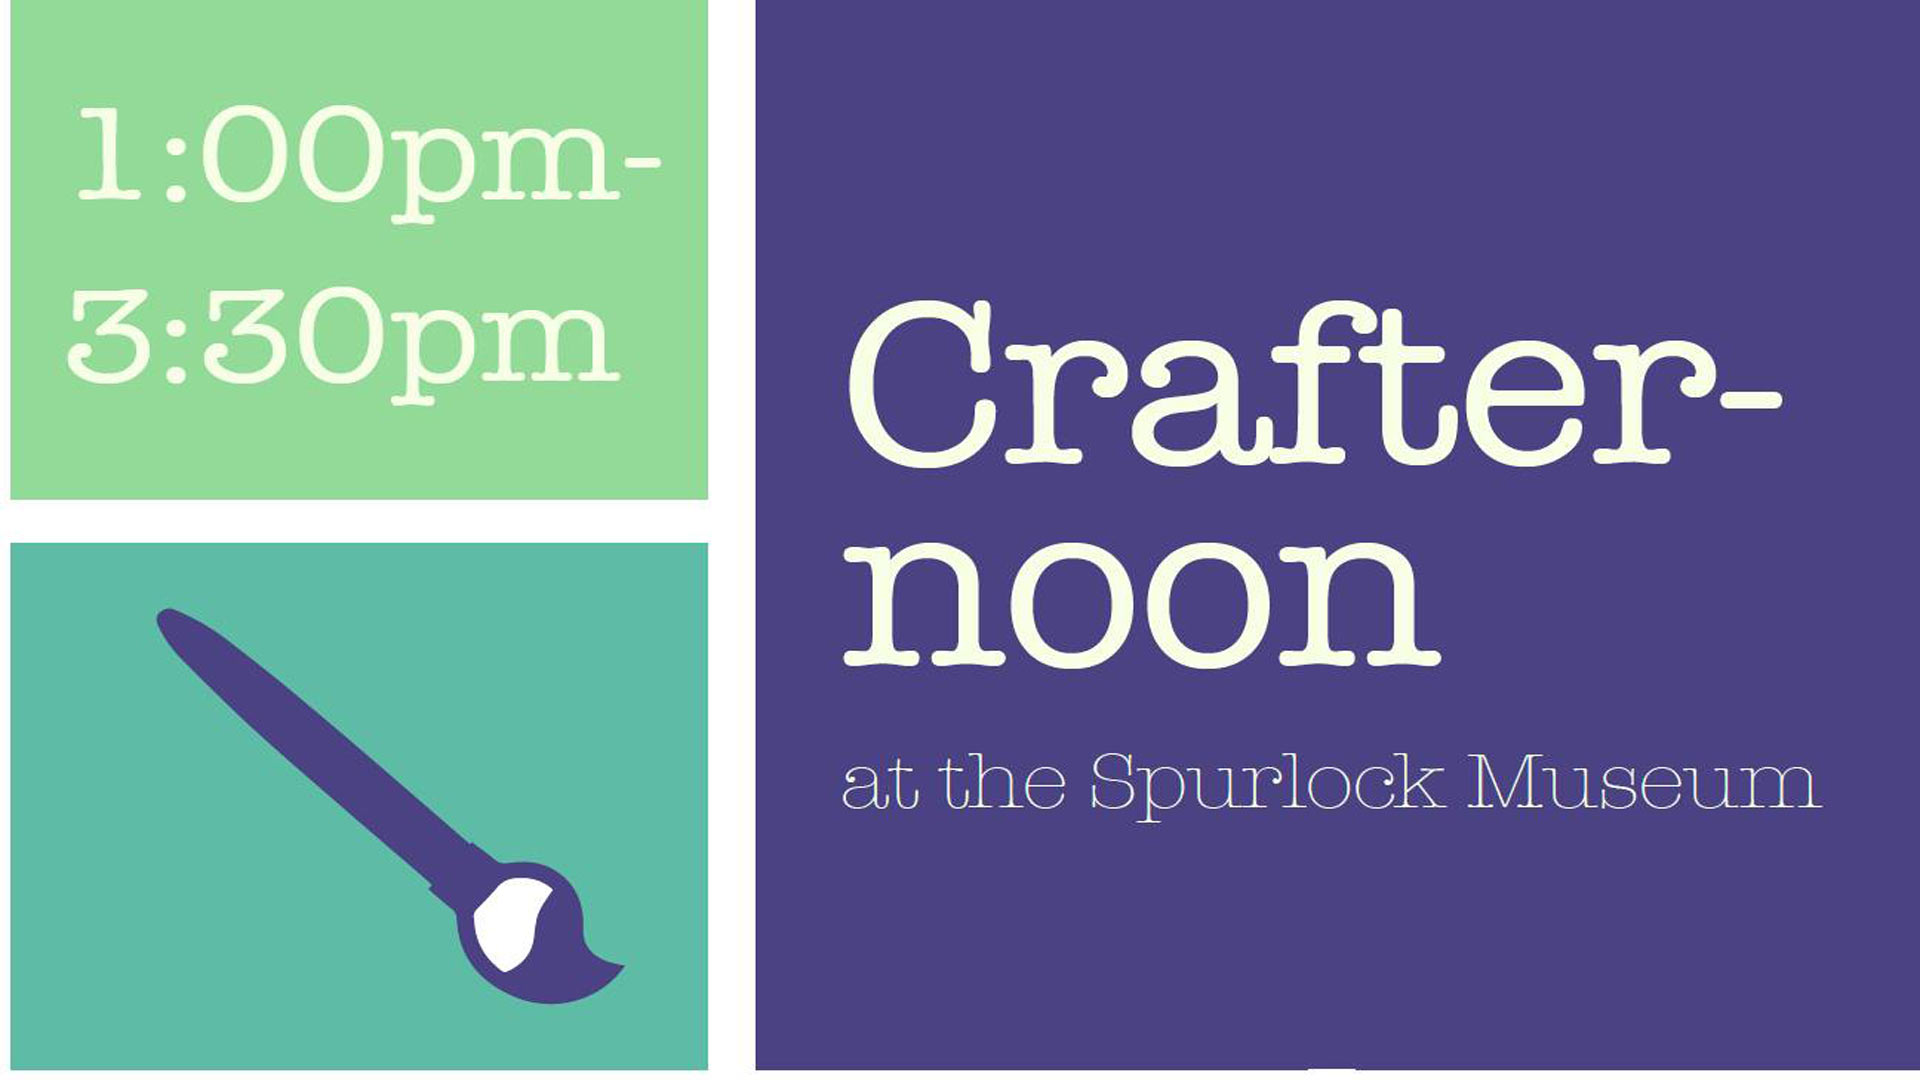 Image for Crafternoon event 